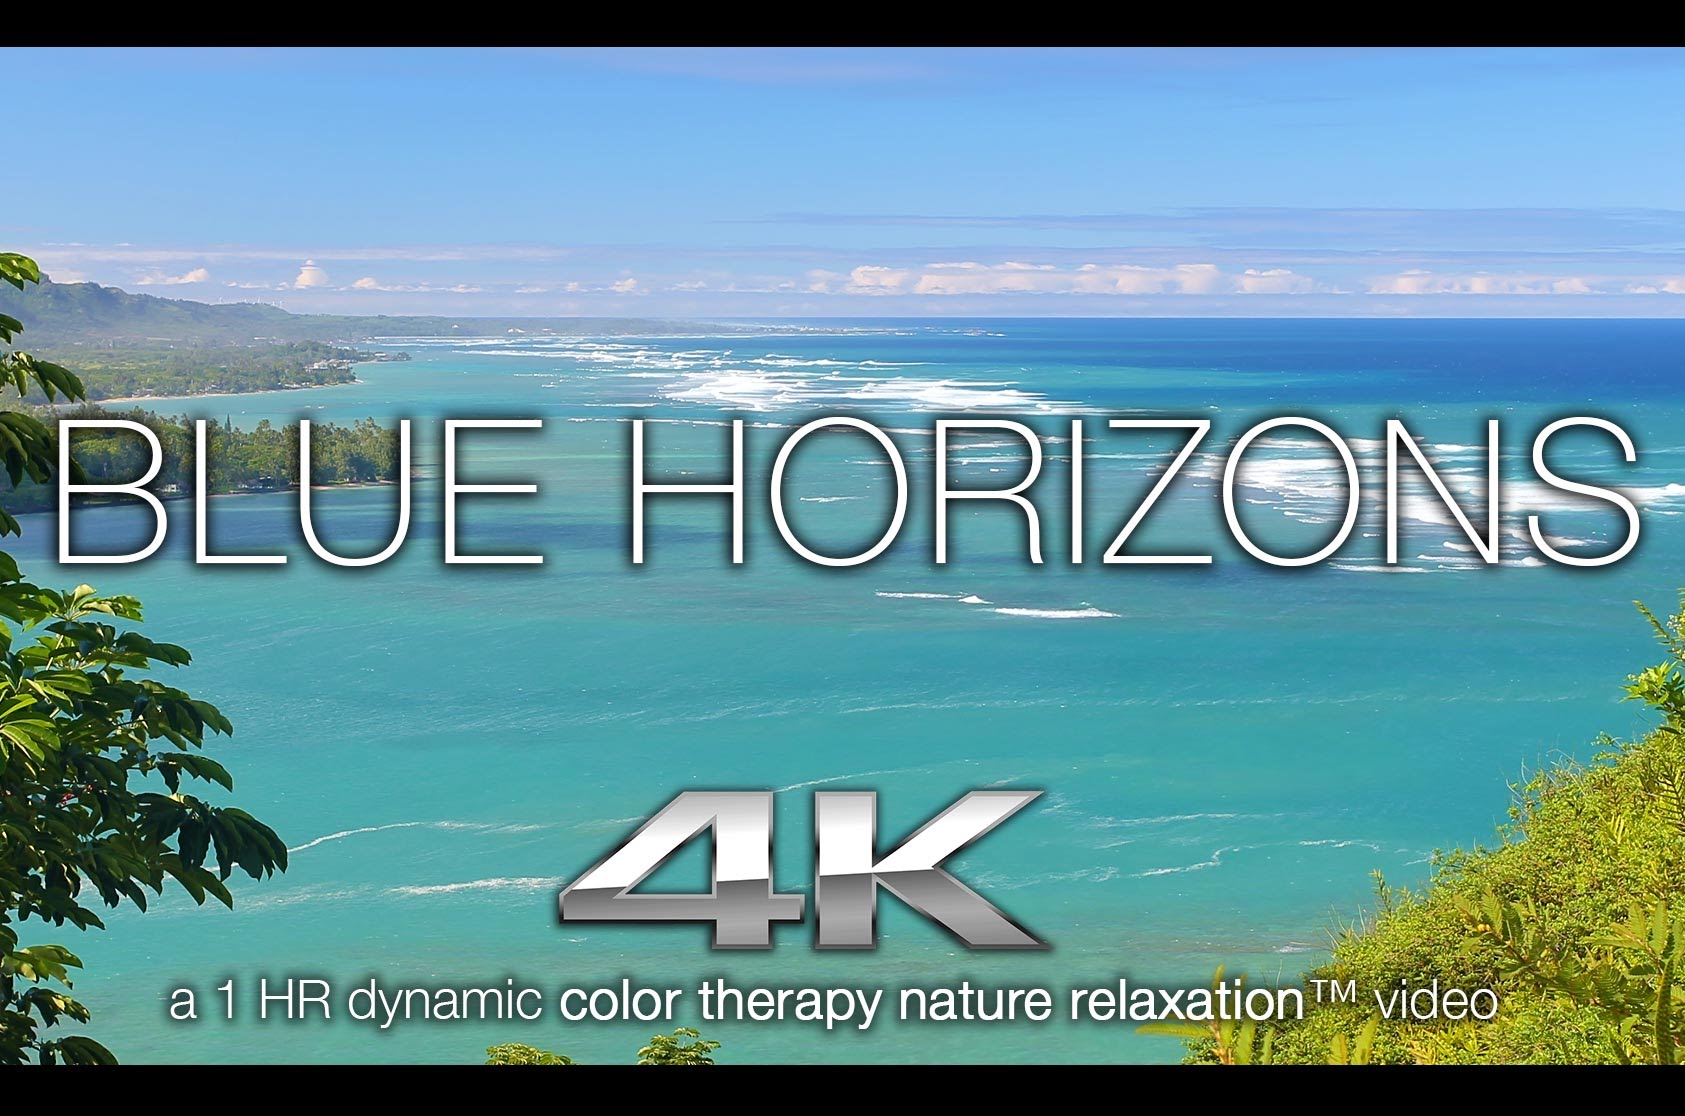 BLUE HORIZONS in 4K | Nature Relaxation™ Color Therapy Healing Music Video